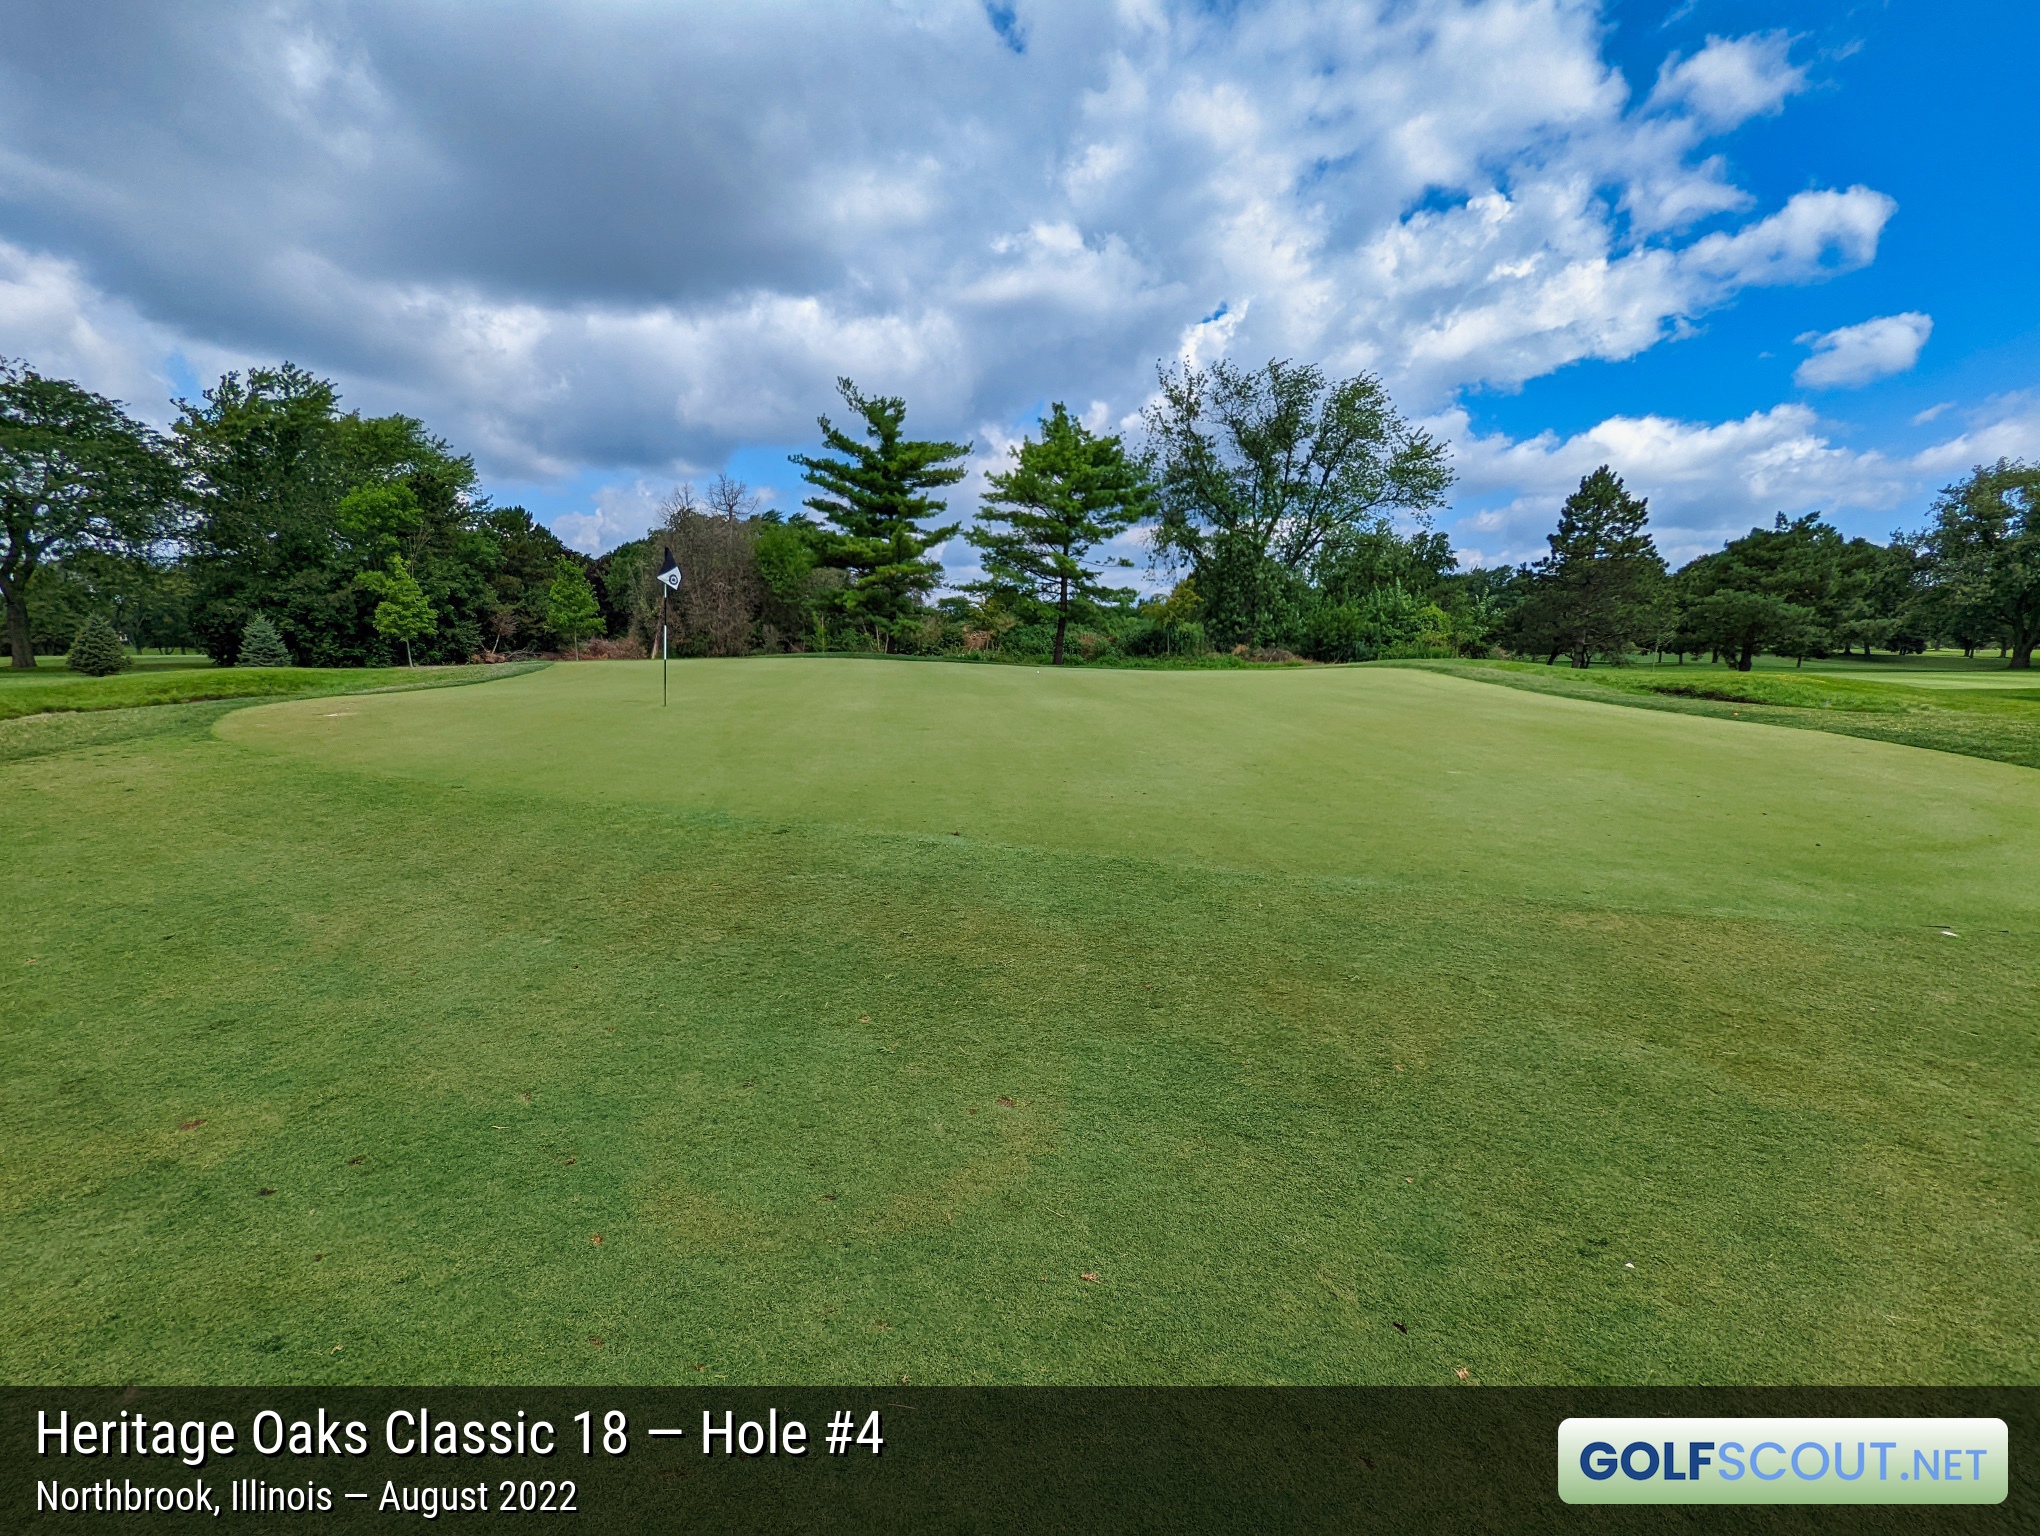 Photo of hole #4 at Heritage Oaks Golf Club - Classic 18 in Northbrook, Illinois. 